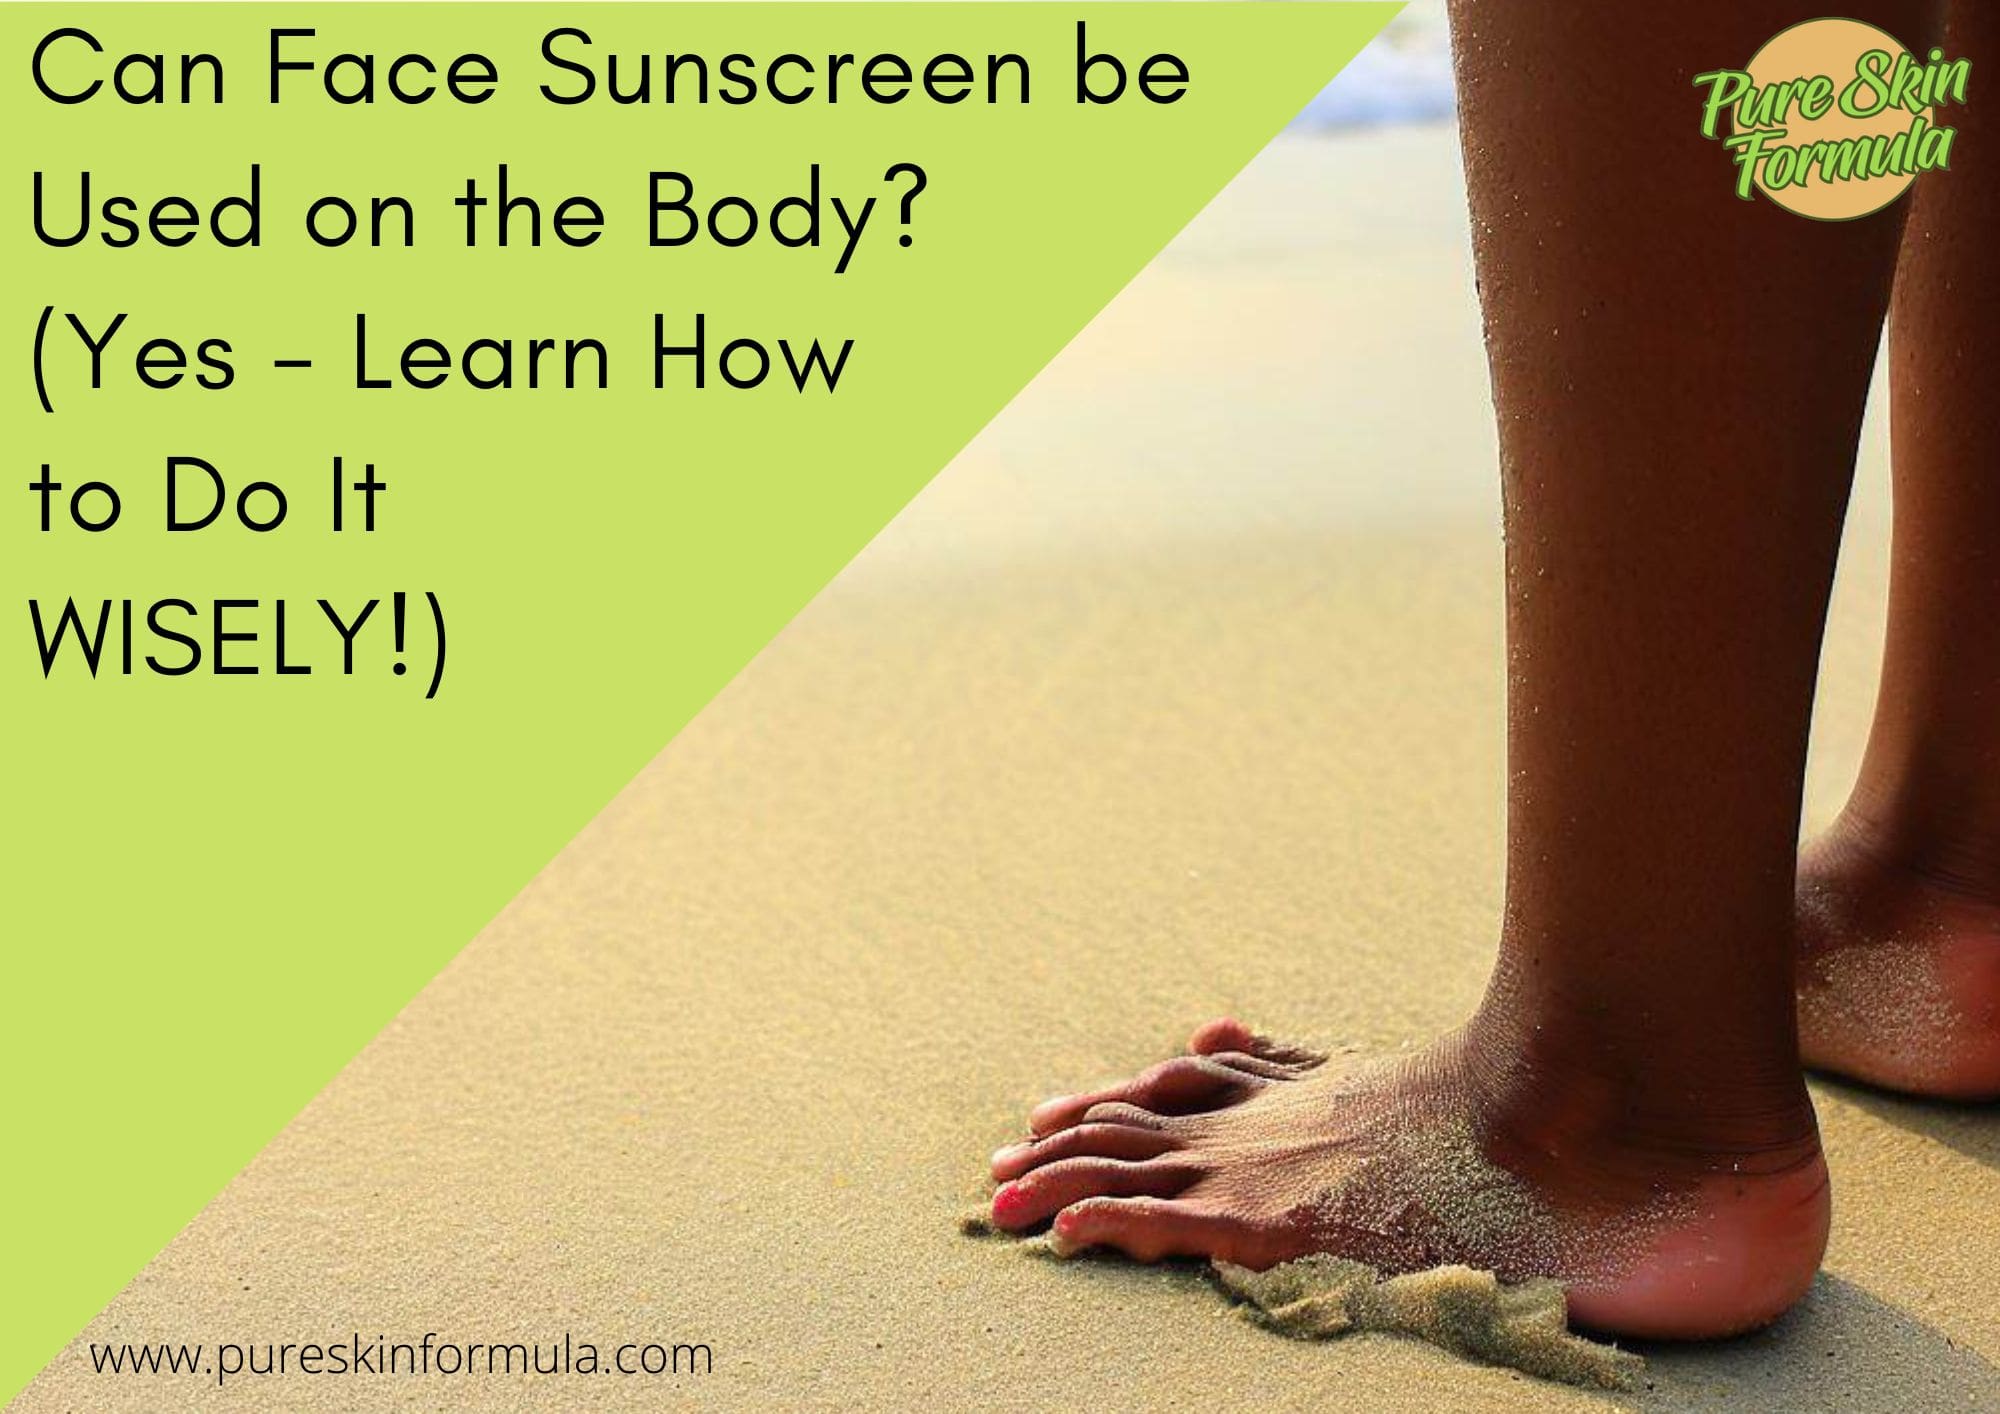 Can Face Sunscreen be Used on the Body? (Yes – Learn How to Do It WISELY!)